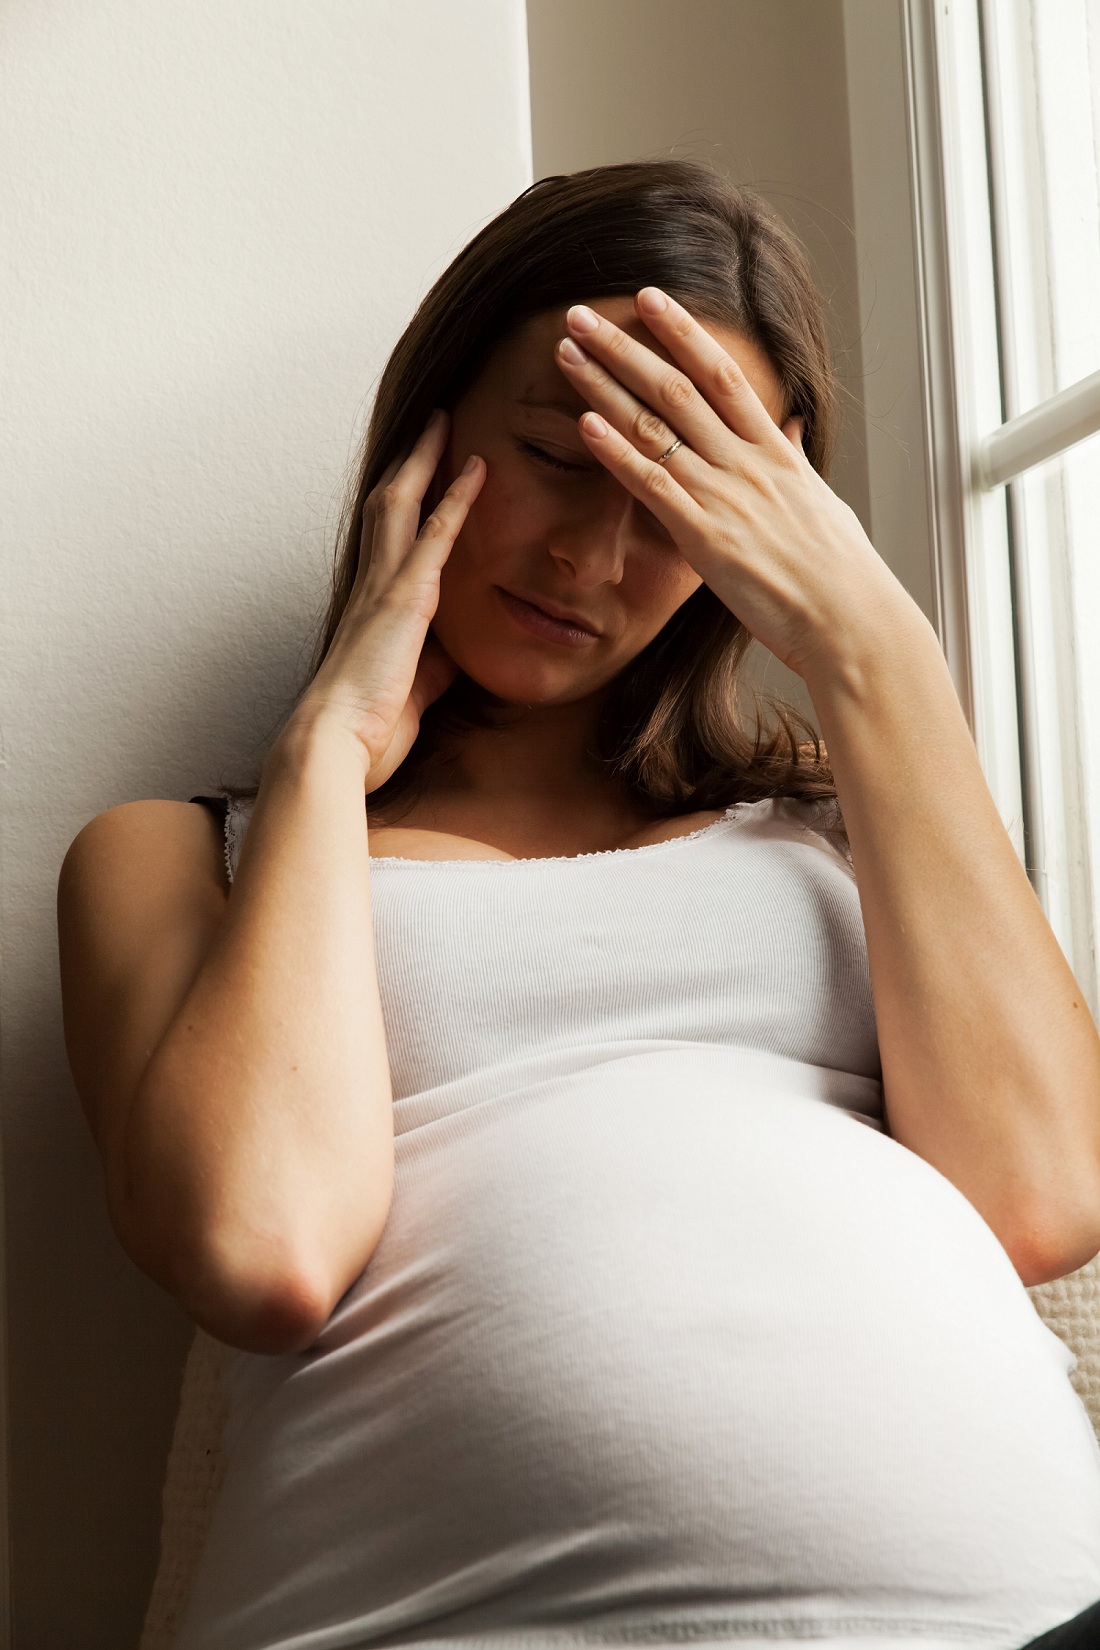 Handle-depression-during-pregnancy-with-utmost-care.jpg